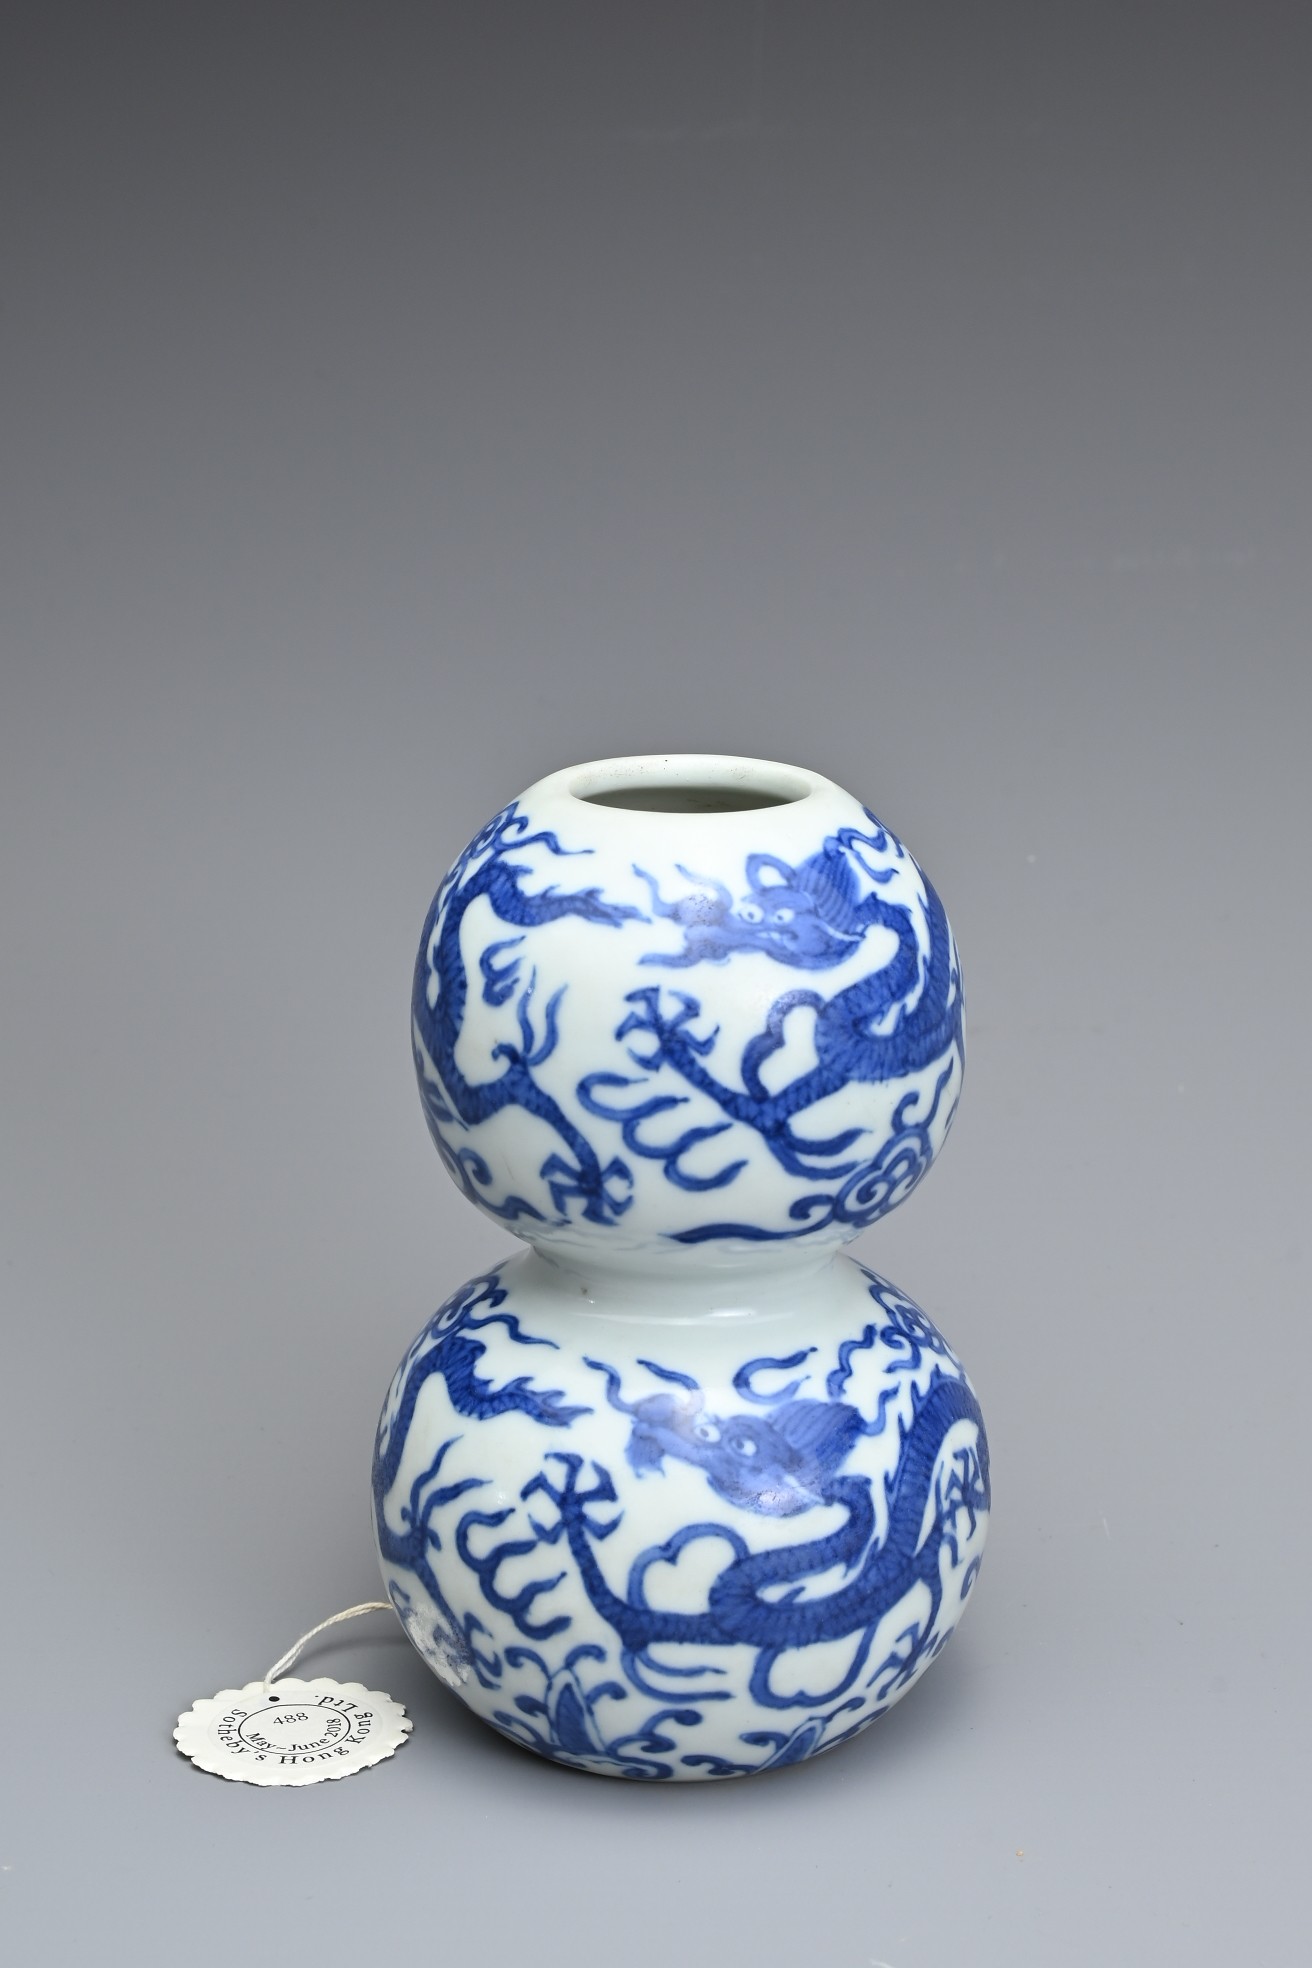 A CHINESE BLUE AND WHITE PORCELAIN DOUBLE-GOURD DRAGON VASE, MARK AND PERIOD OF JIAJING (1522-1566) - Image 2 of 9